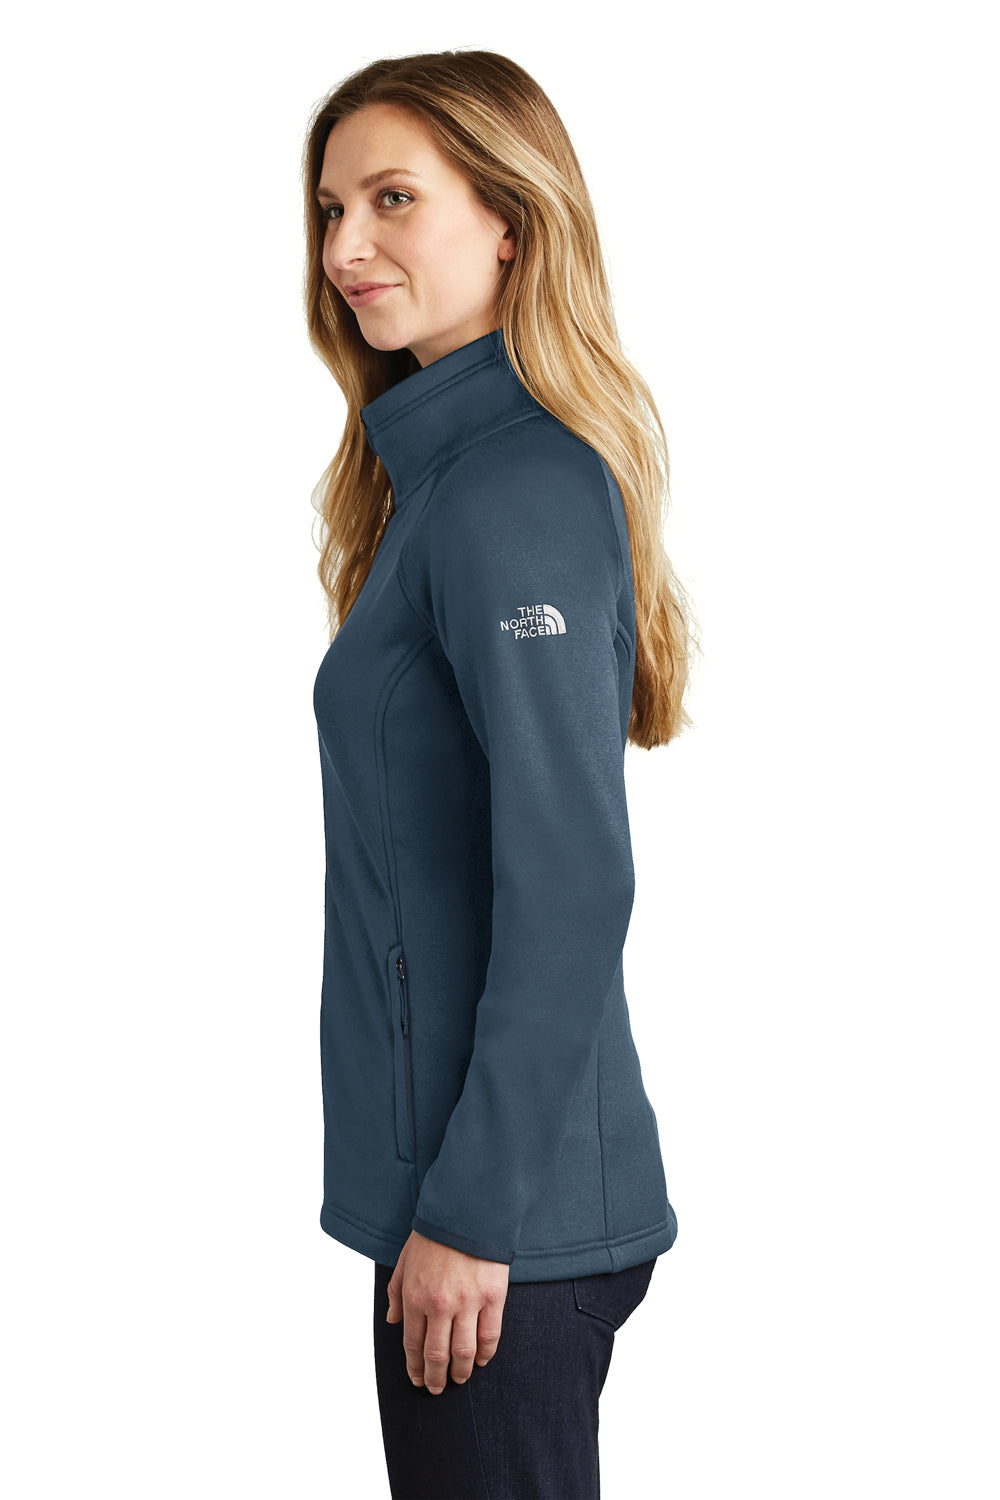 The North Face NF0A3LHA Womens Canyon Flats Full Zip Fleece Jacket Heather Navy Blue Side